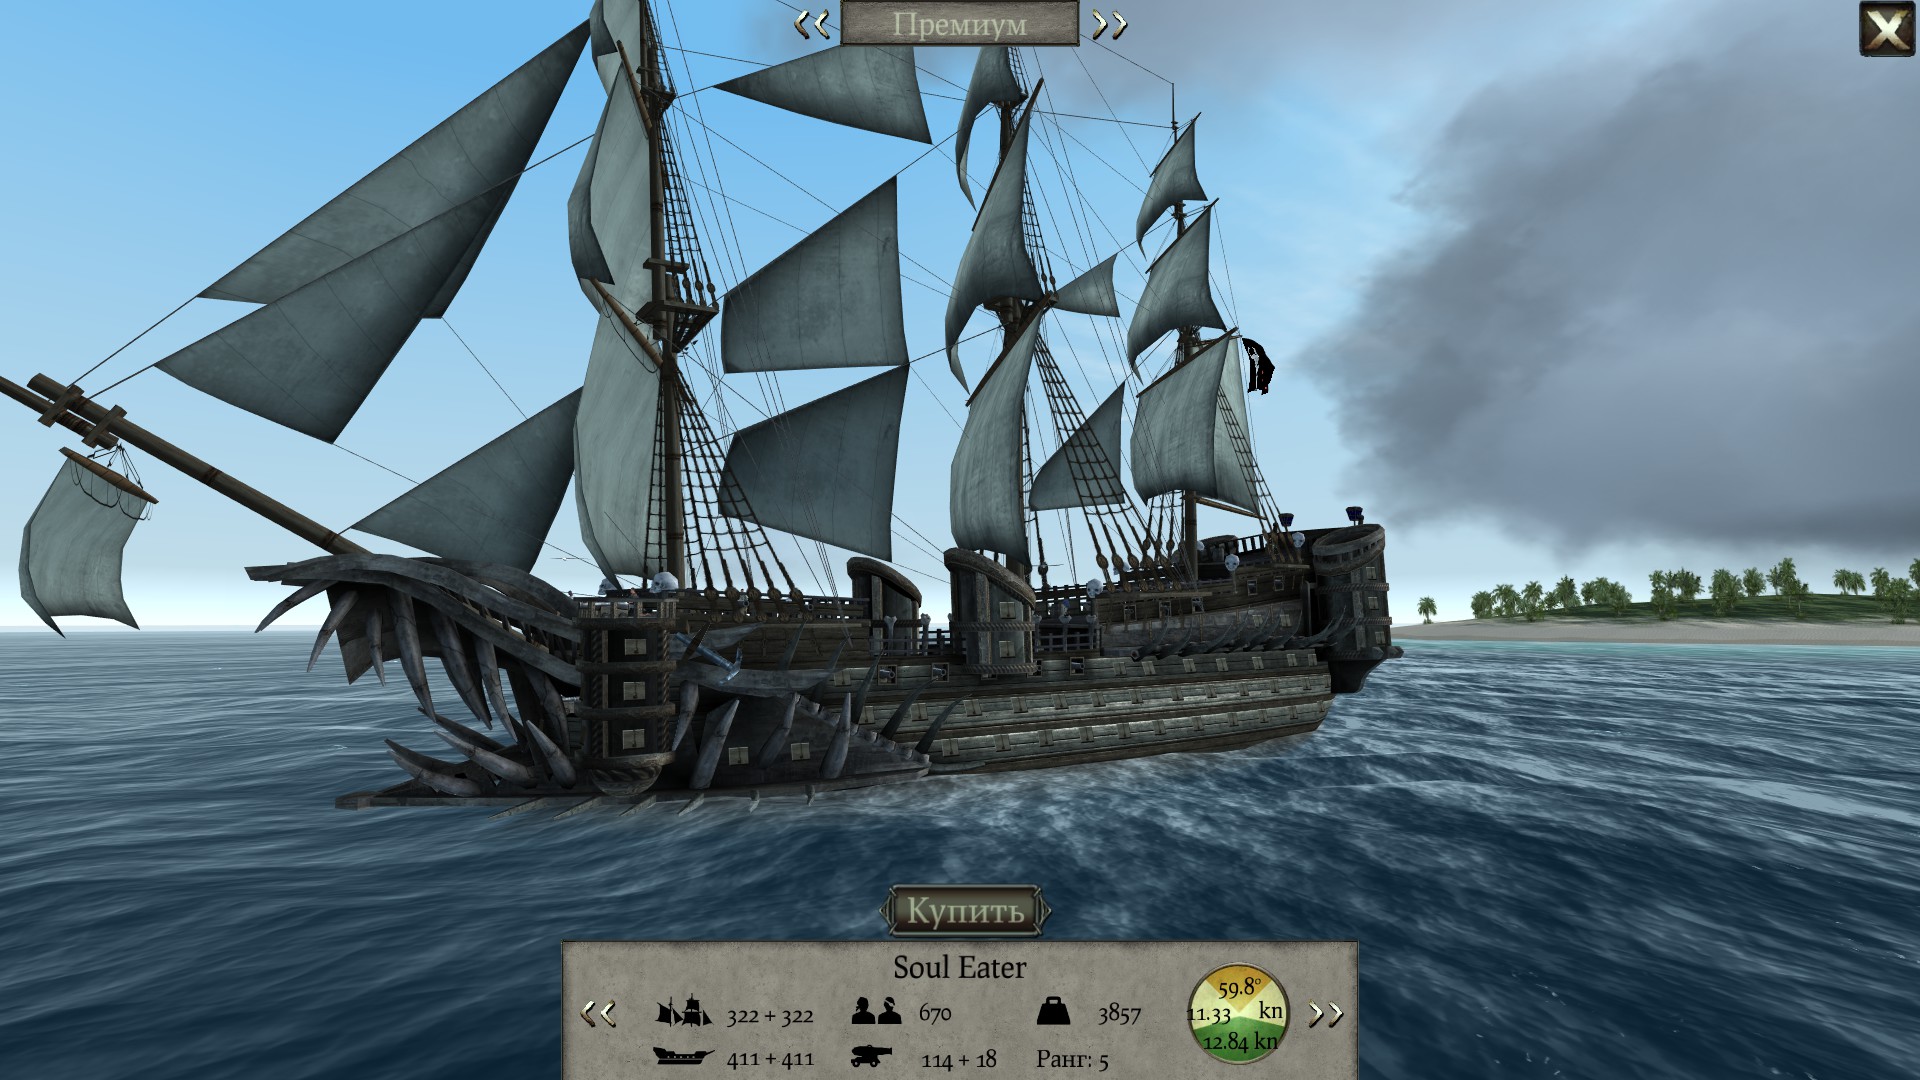 how to rename ship the pirate plague of the dead